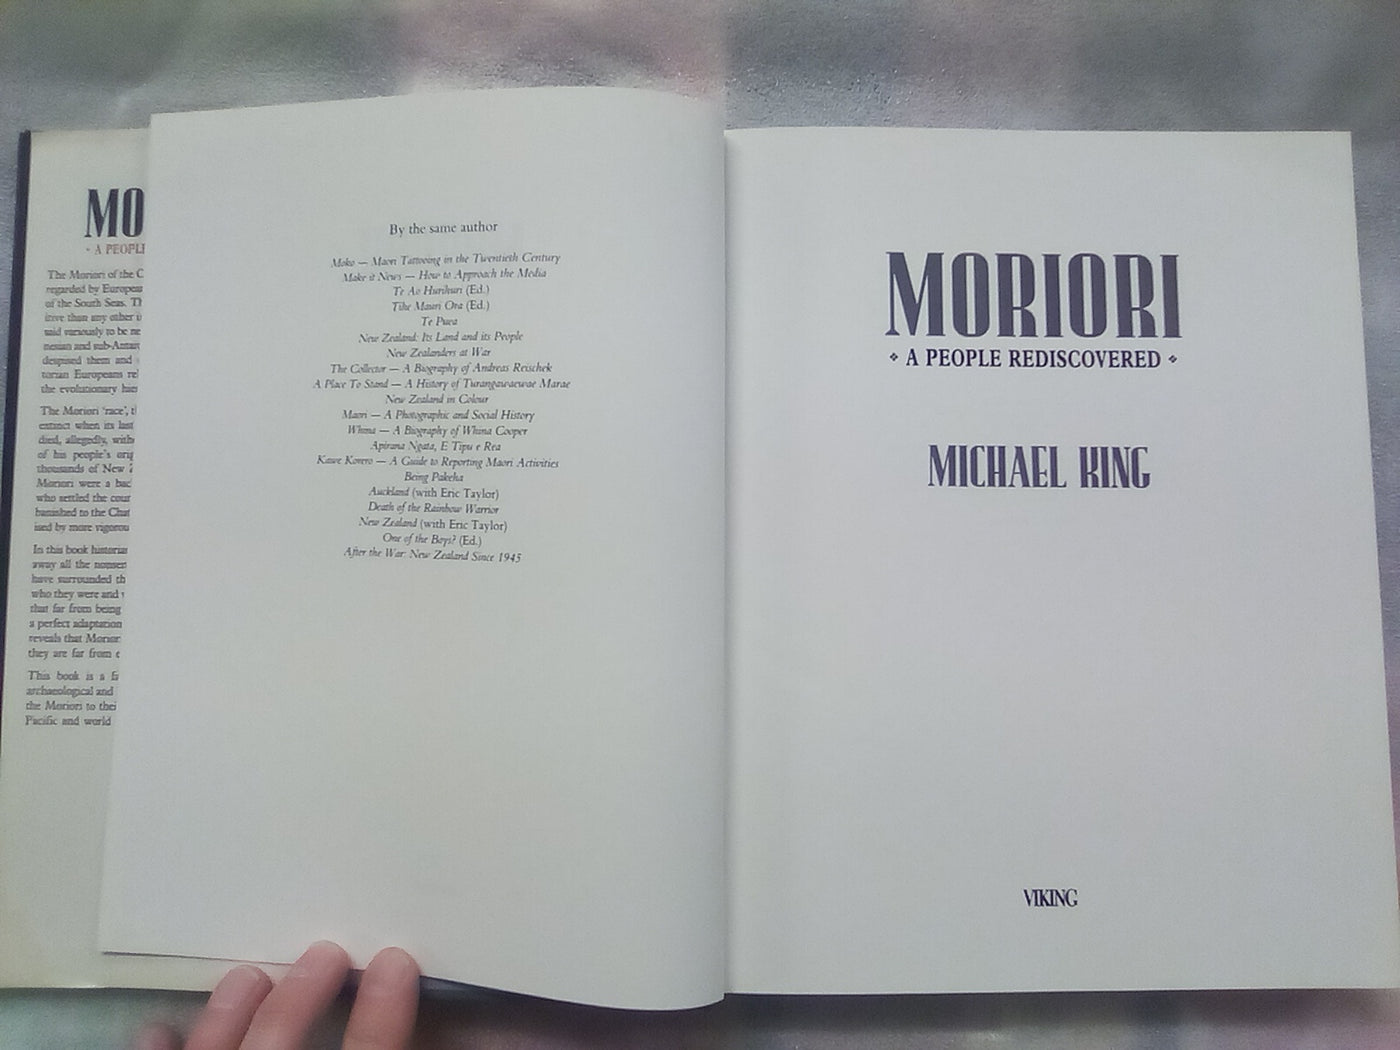 Moriori - A People Rediscovered (1989) by Michael King